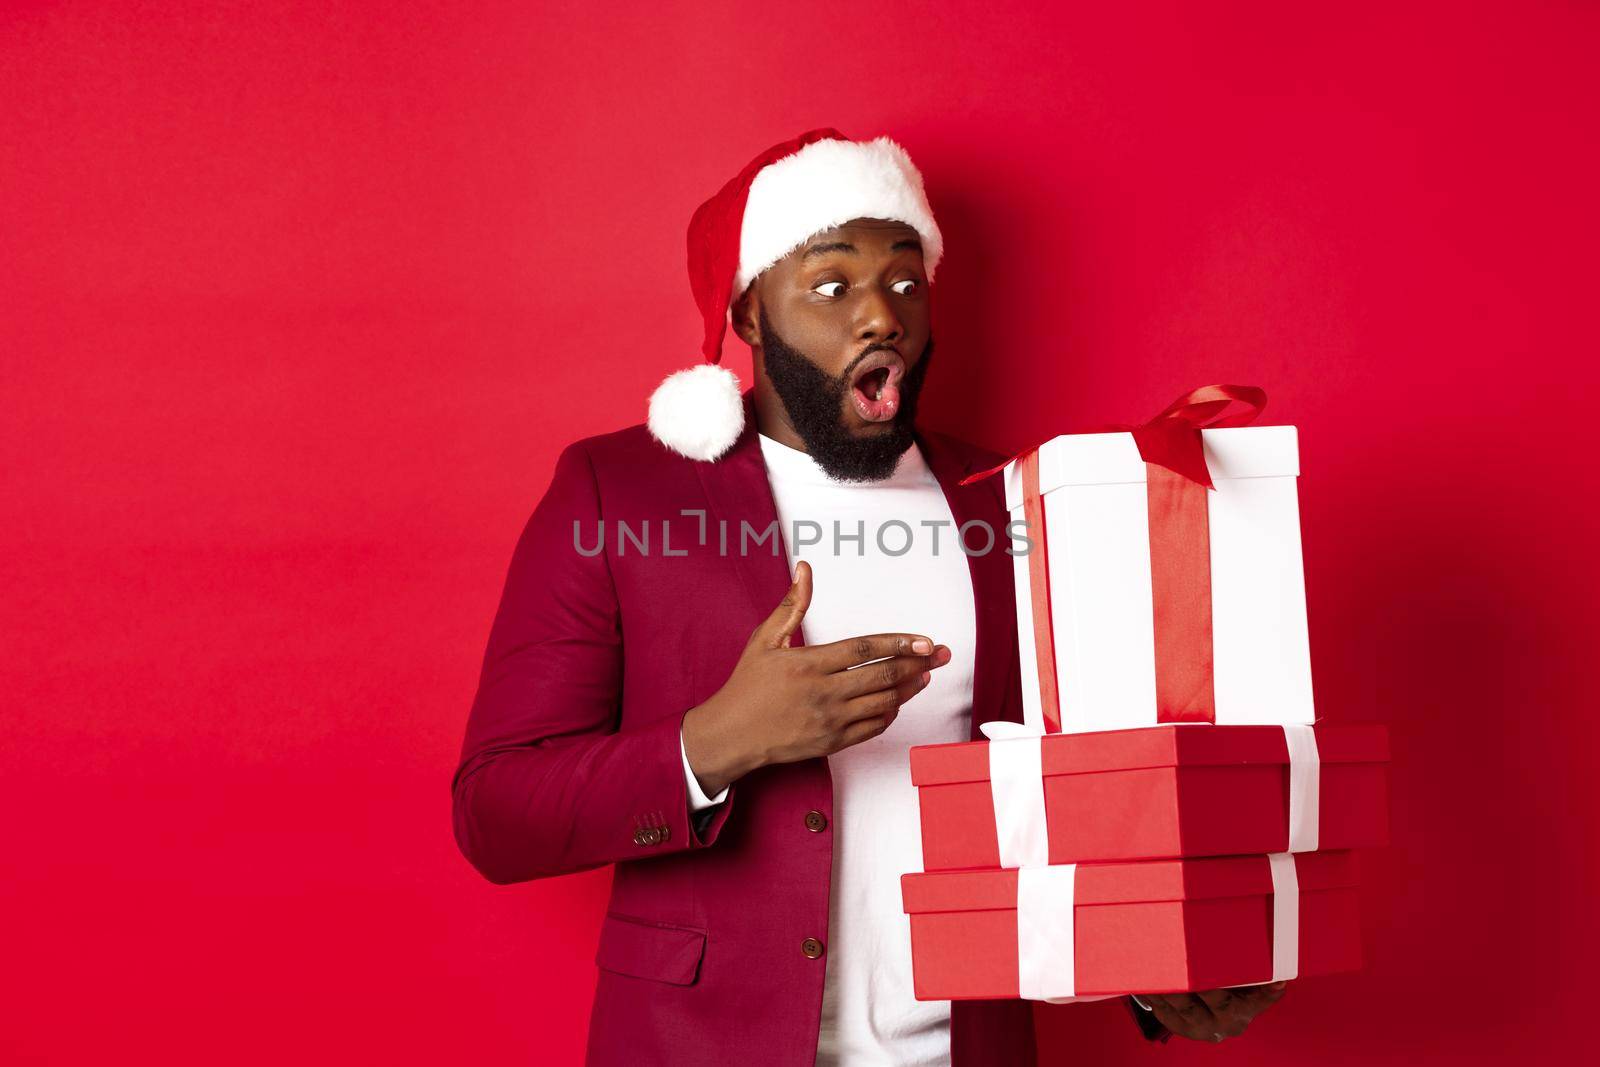 Christmas, New Year and shopping concept. Surprised Black man looking at xmas presents with amazement, wearing santa hat, standing with gifts against red background.